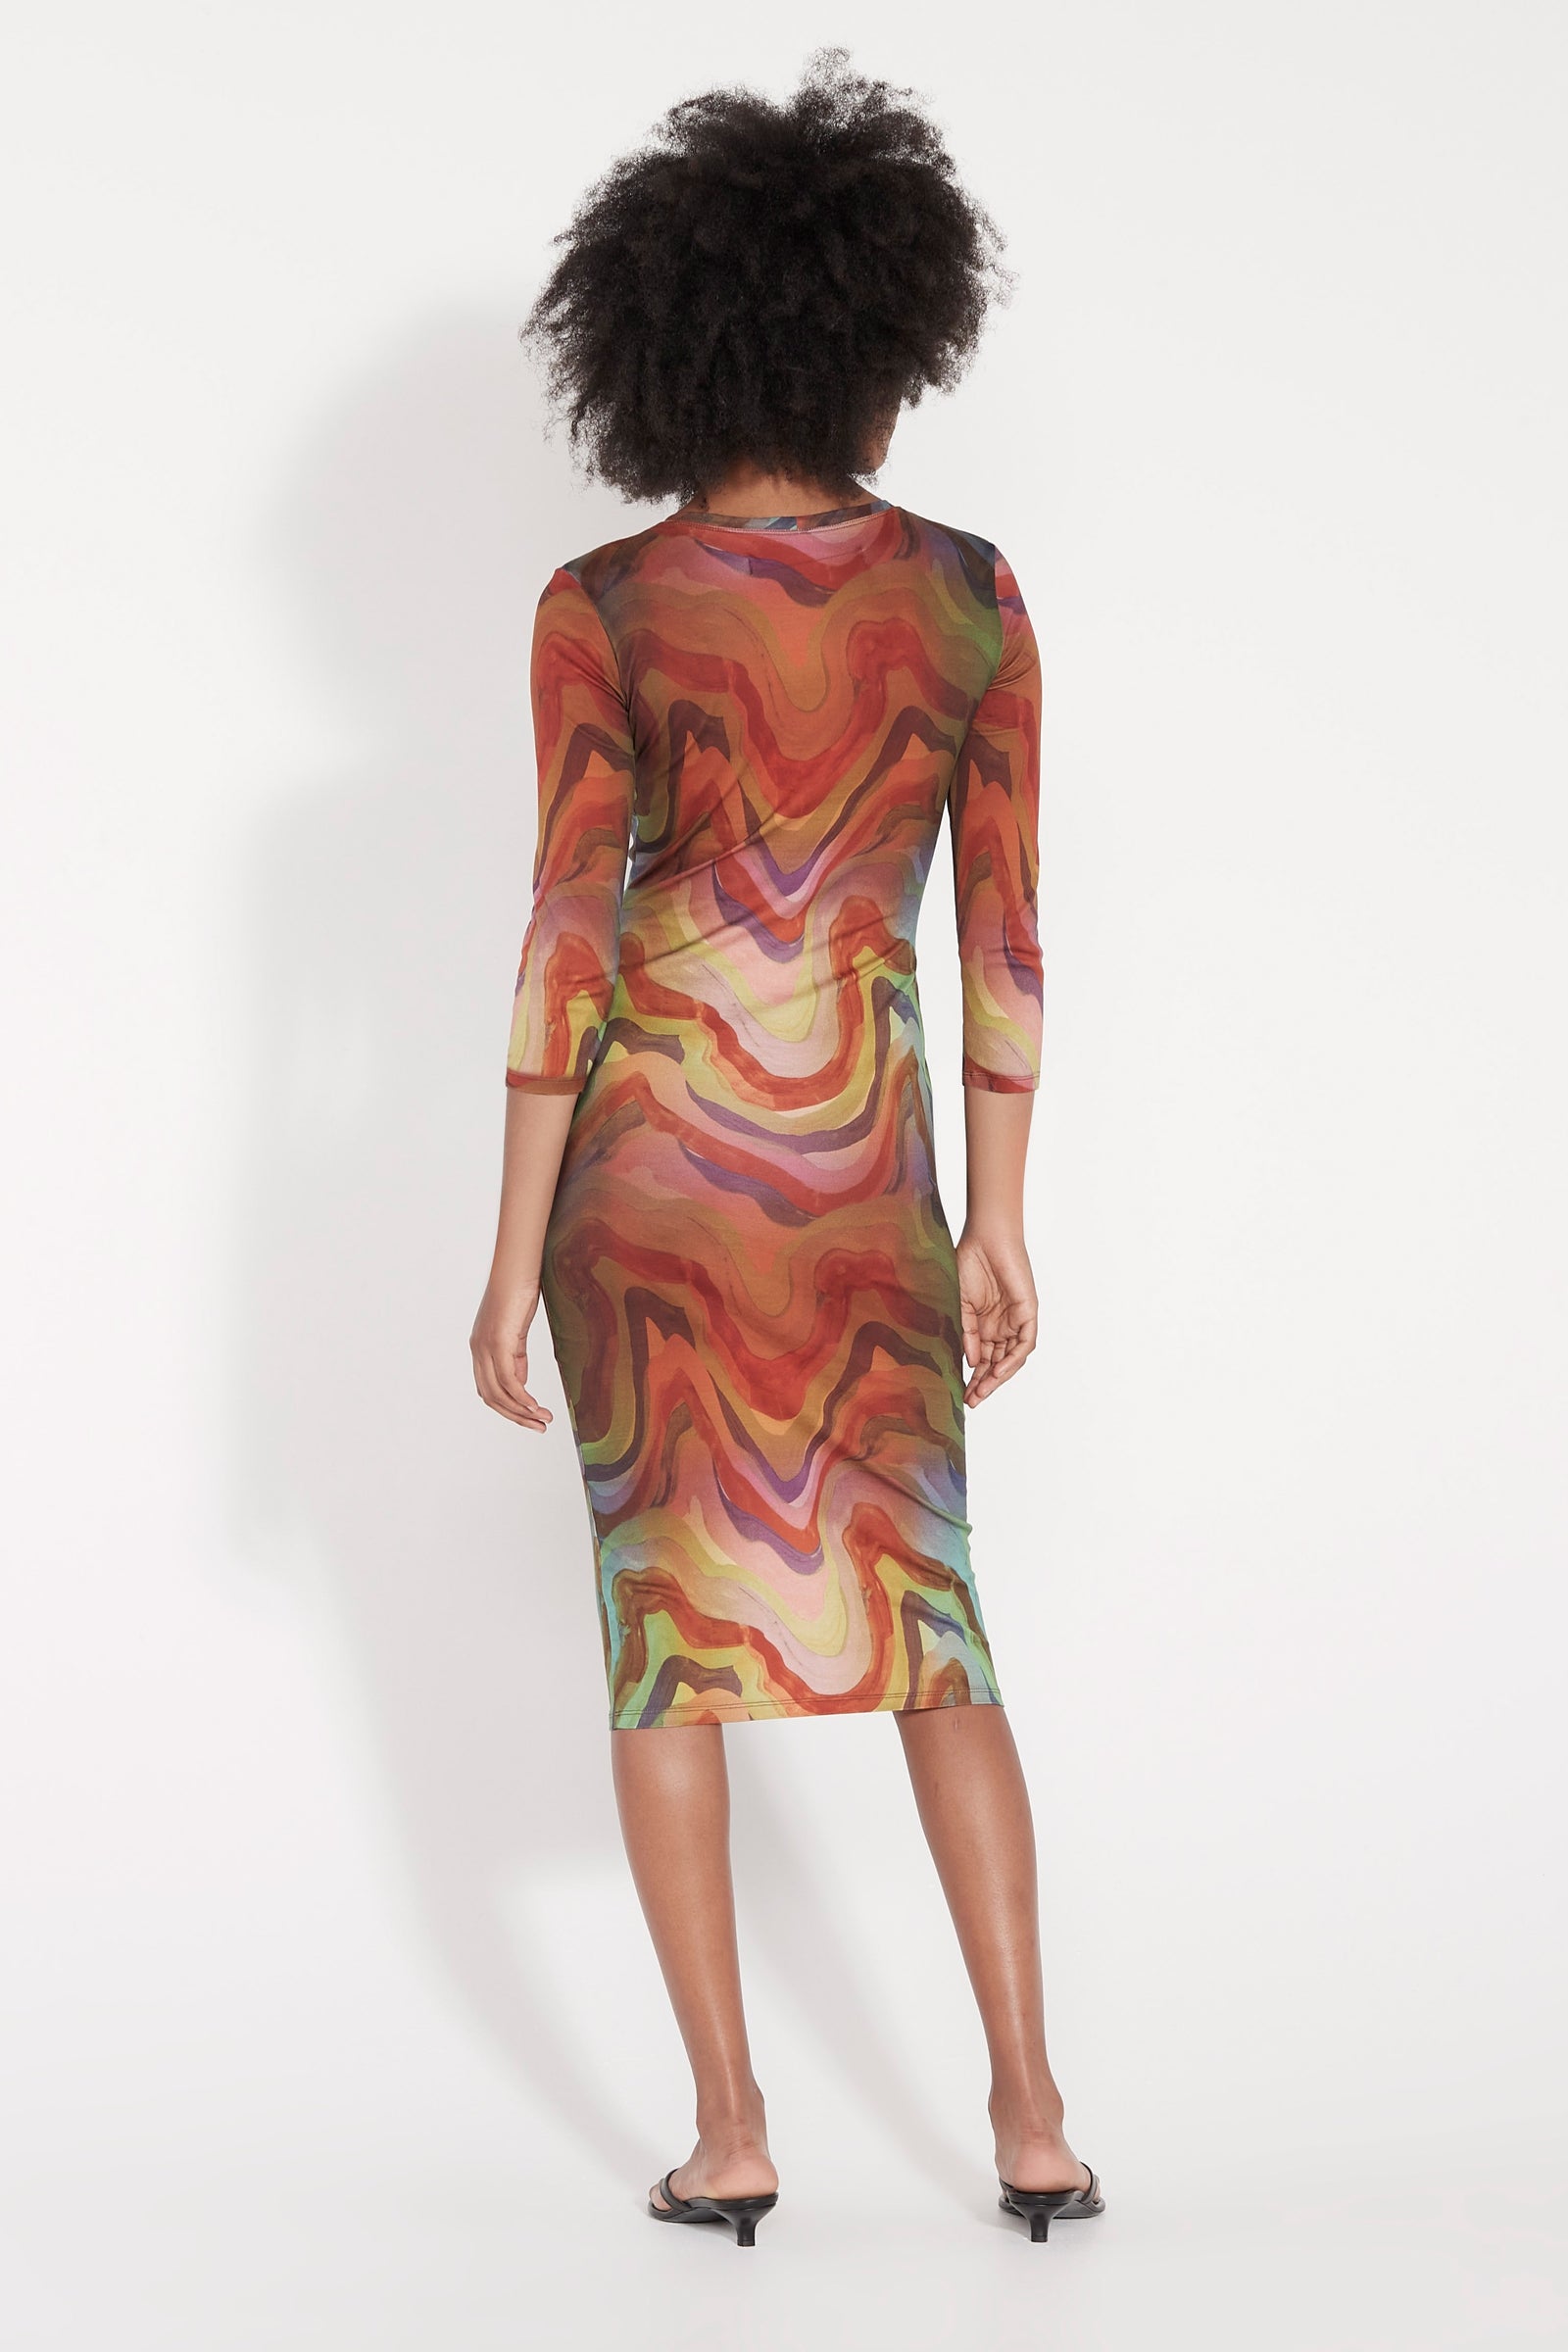 Multi Waves Printed Jersey Dress Full Back View